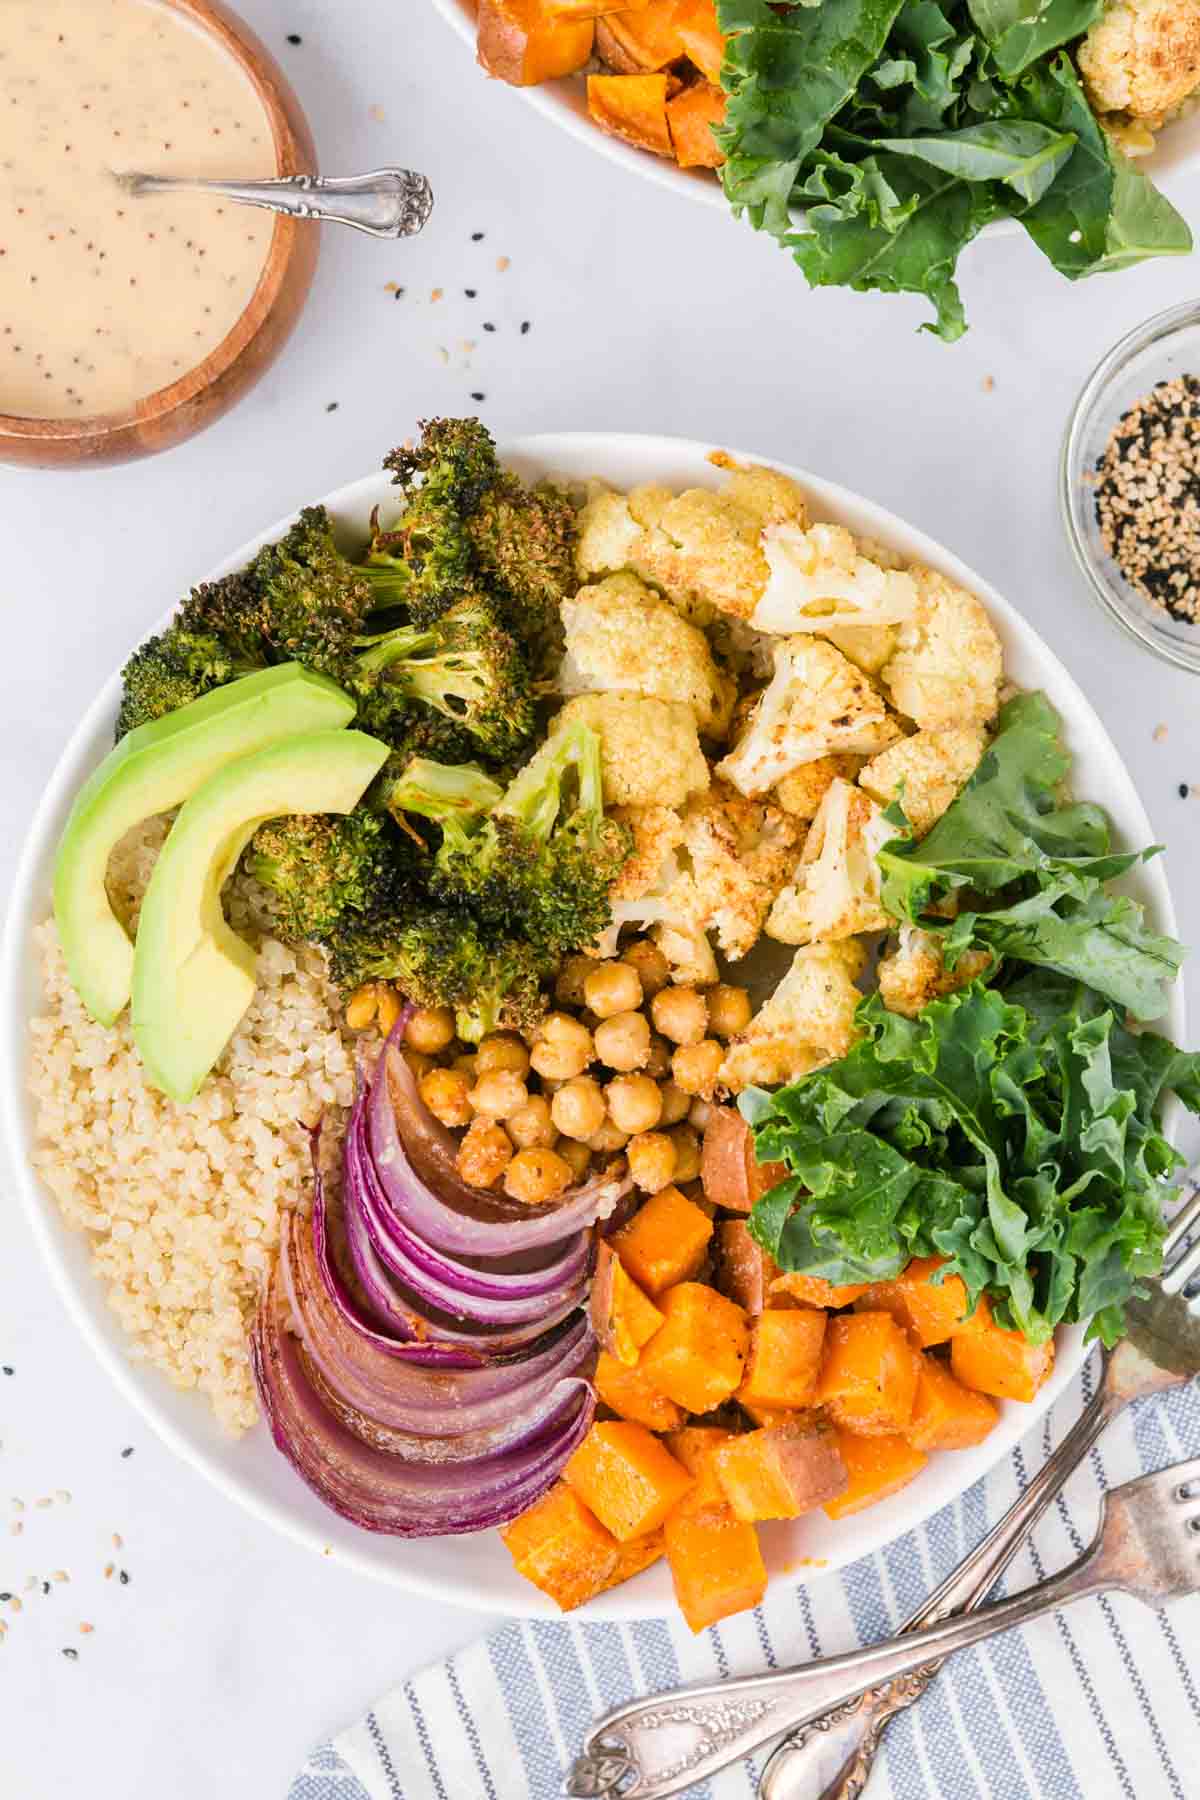 Overhead view of a sweet potato buddha bowl with roasted veggies, chickpeas, broccoli, kale, and quinoa.